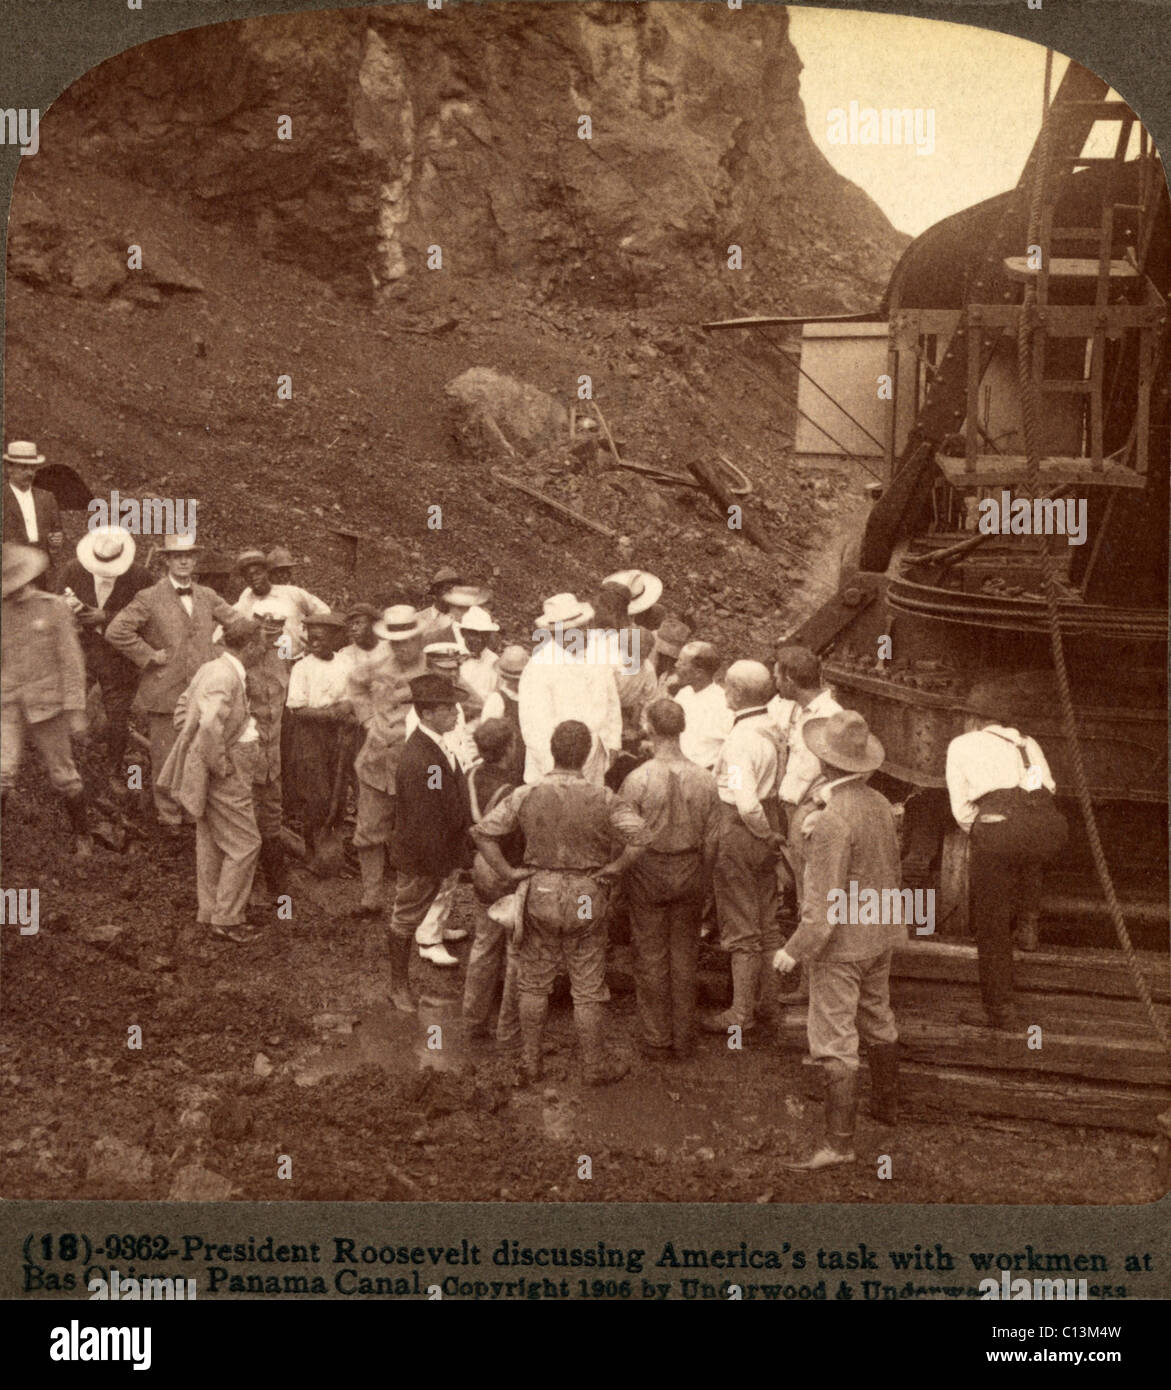 President Roosevelt discussing America's task with workmen at Bas Obispo, Panama Canal, on November 31, 1906. Stock Photo